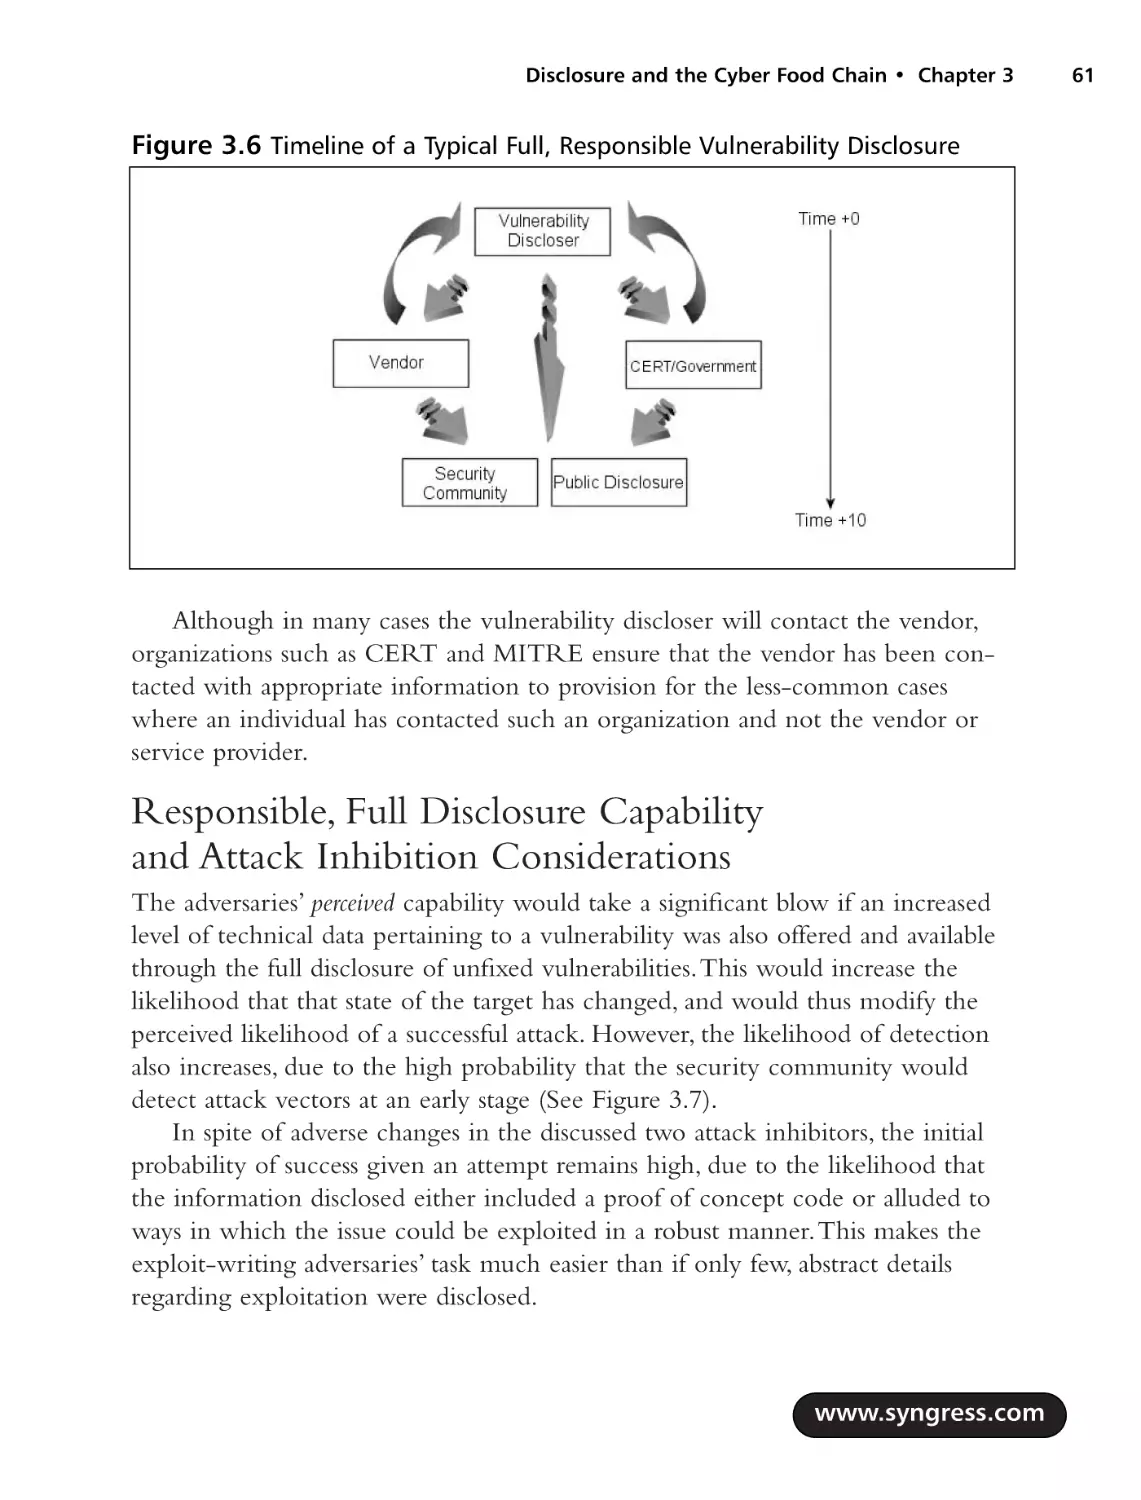 Responsible, Full Disclosure Capability and Attack Inhibition Considerations